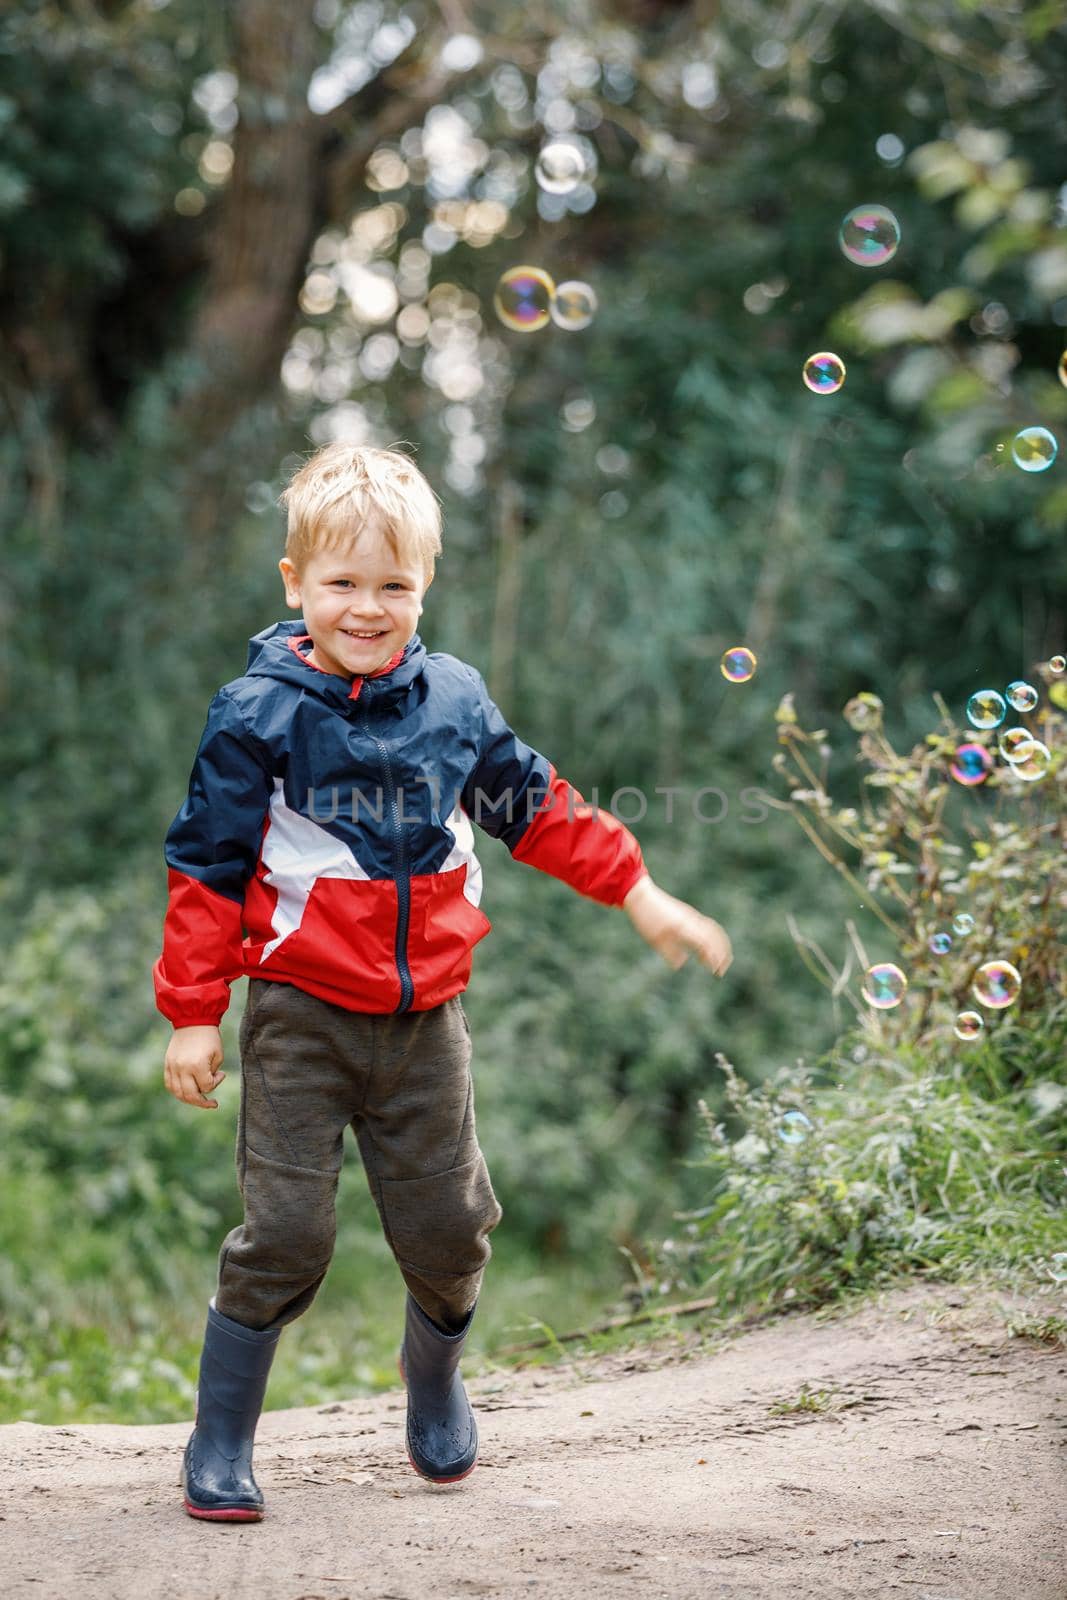 Cute happy little boy playing with soap bubbles in park. by Lincikas